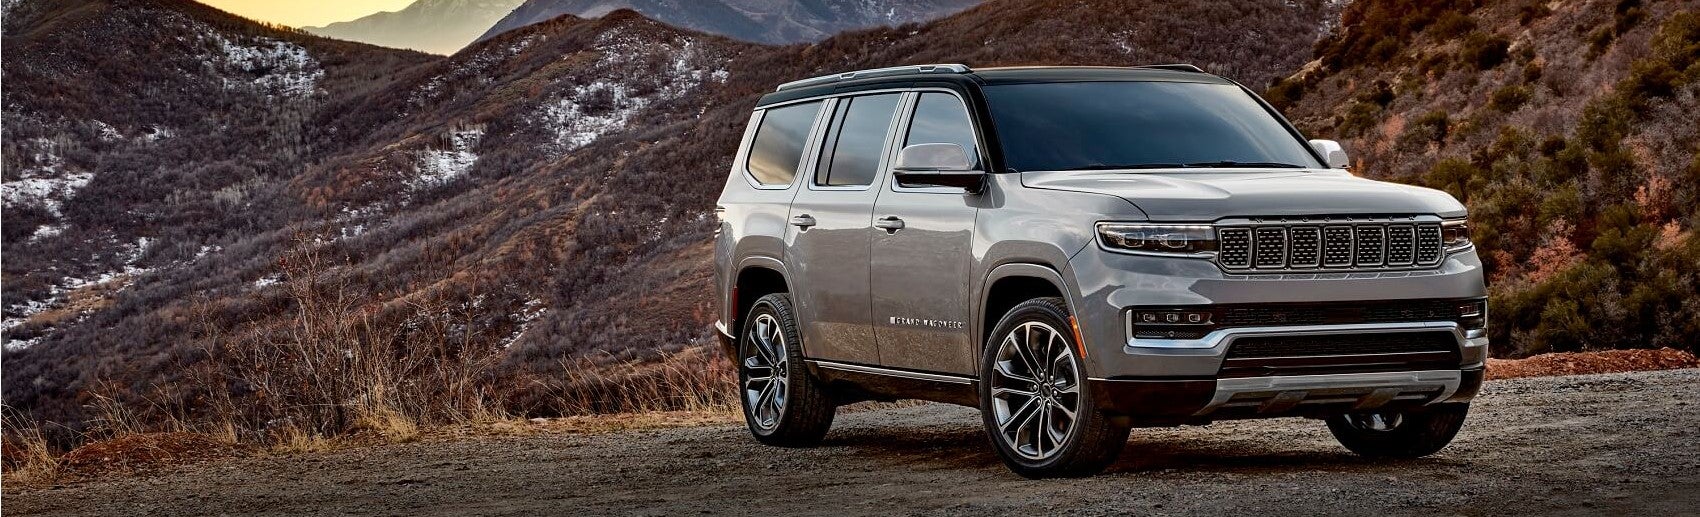 2022 Jeep Grand Wagoneer Silver in Mountains Snipped